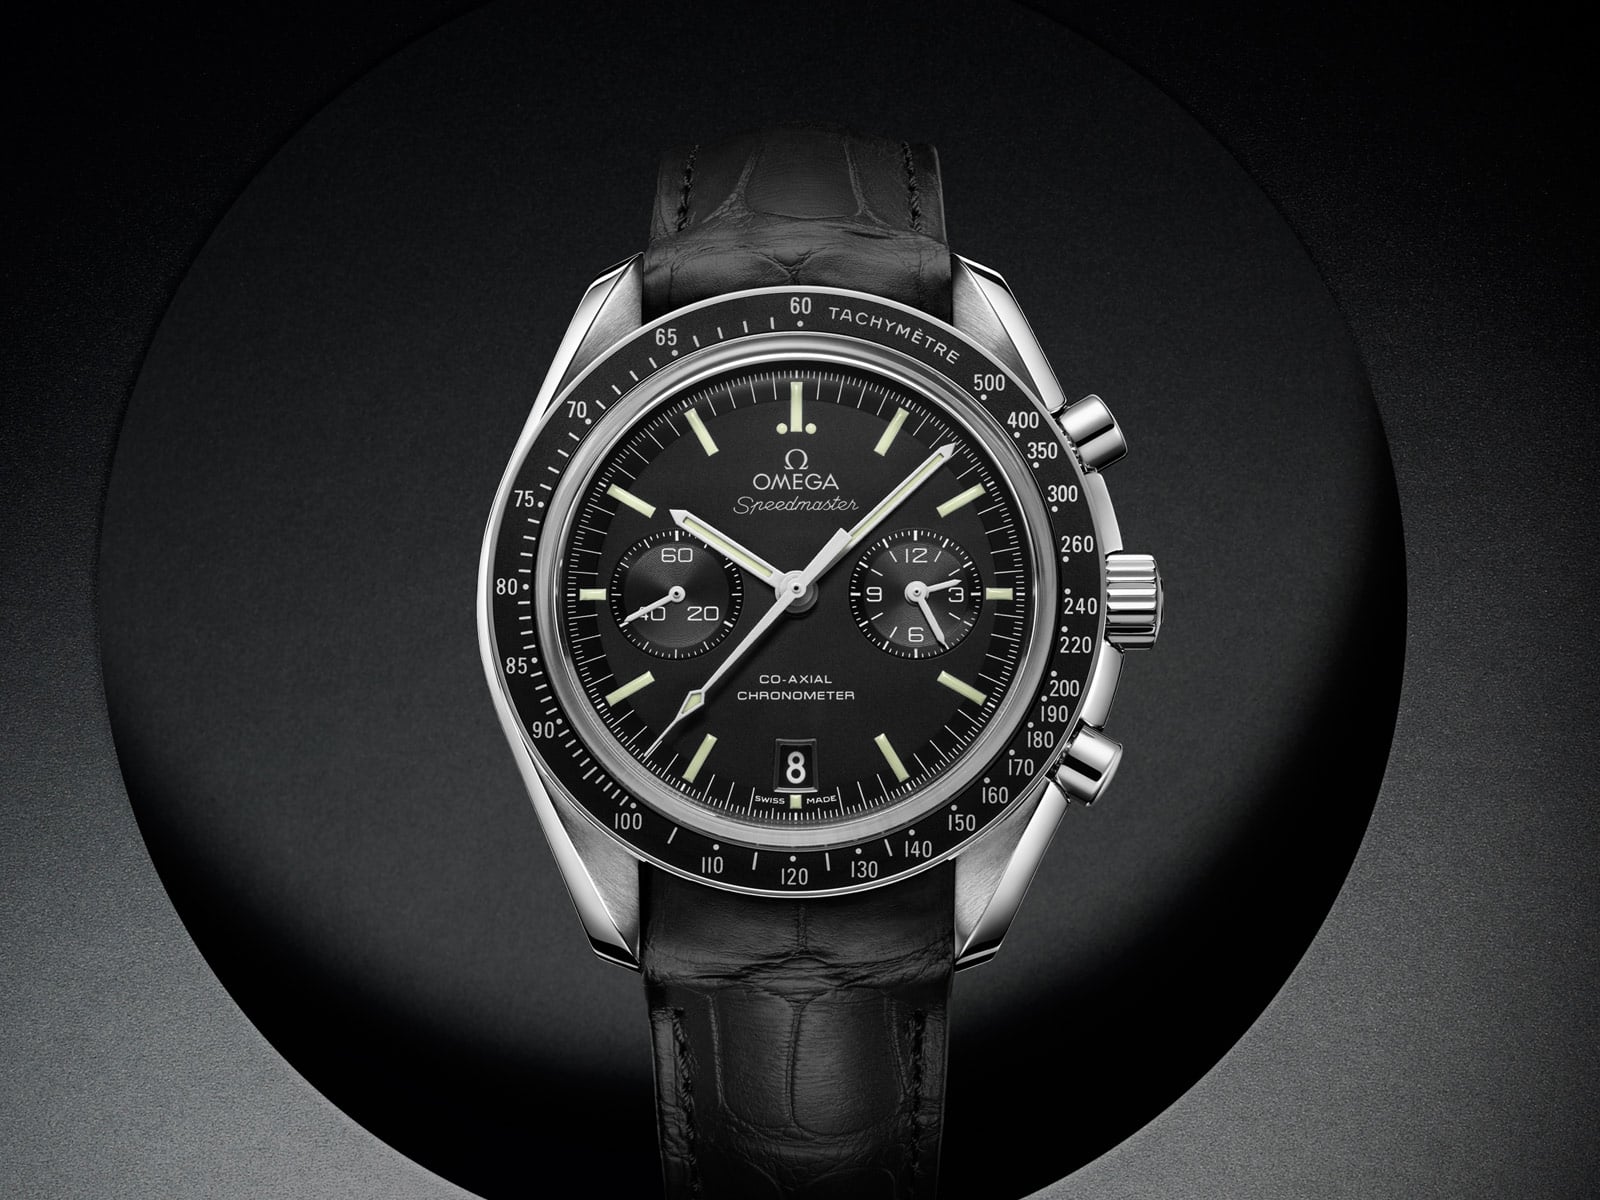 Christopher Ward Replication Watches